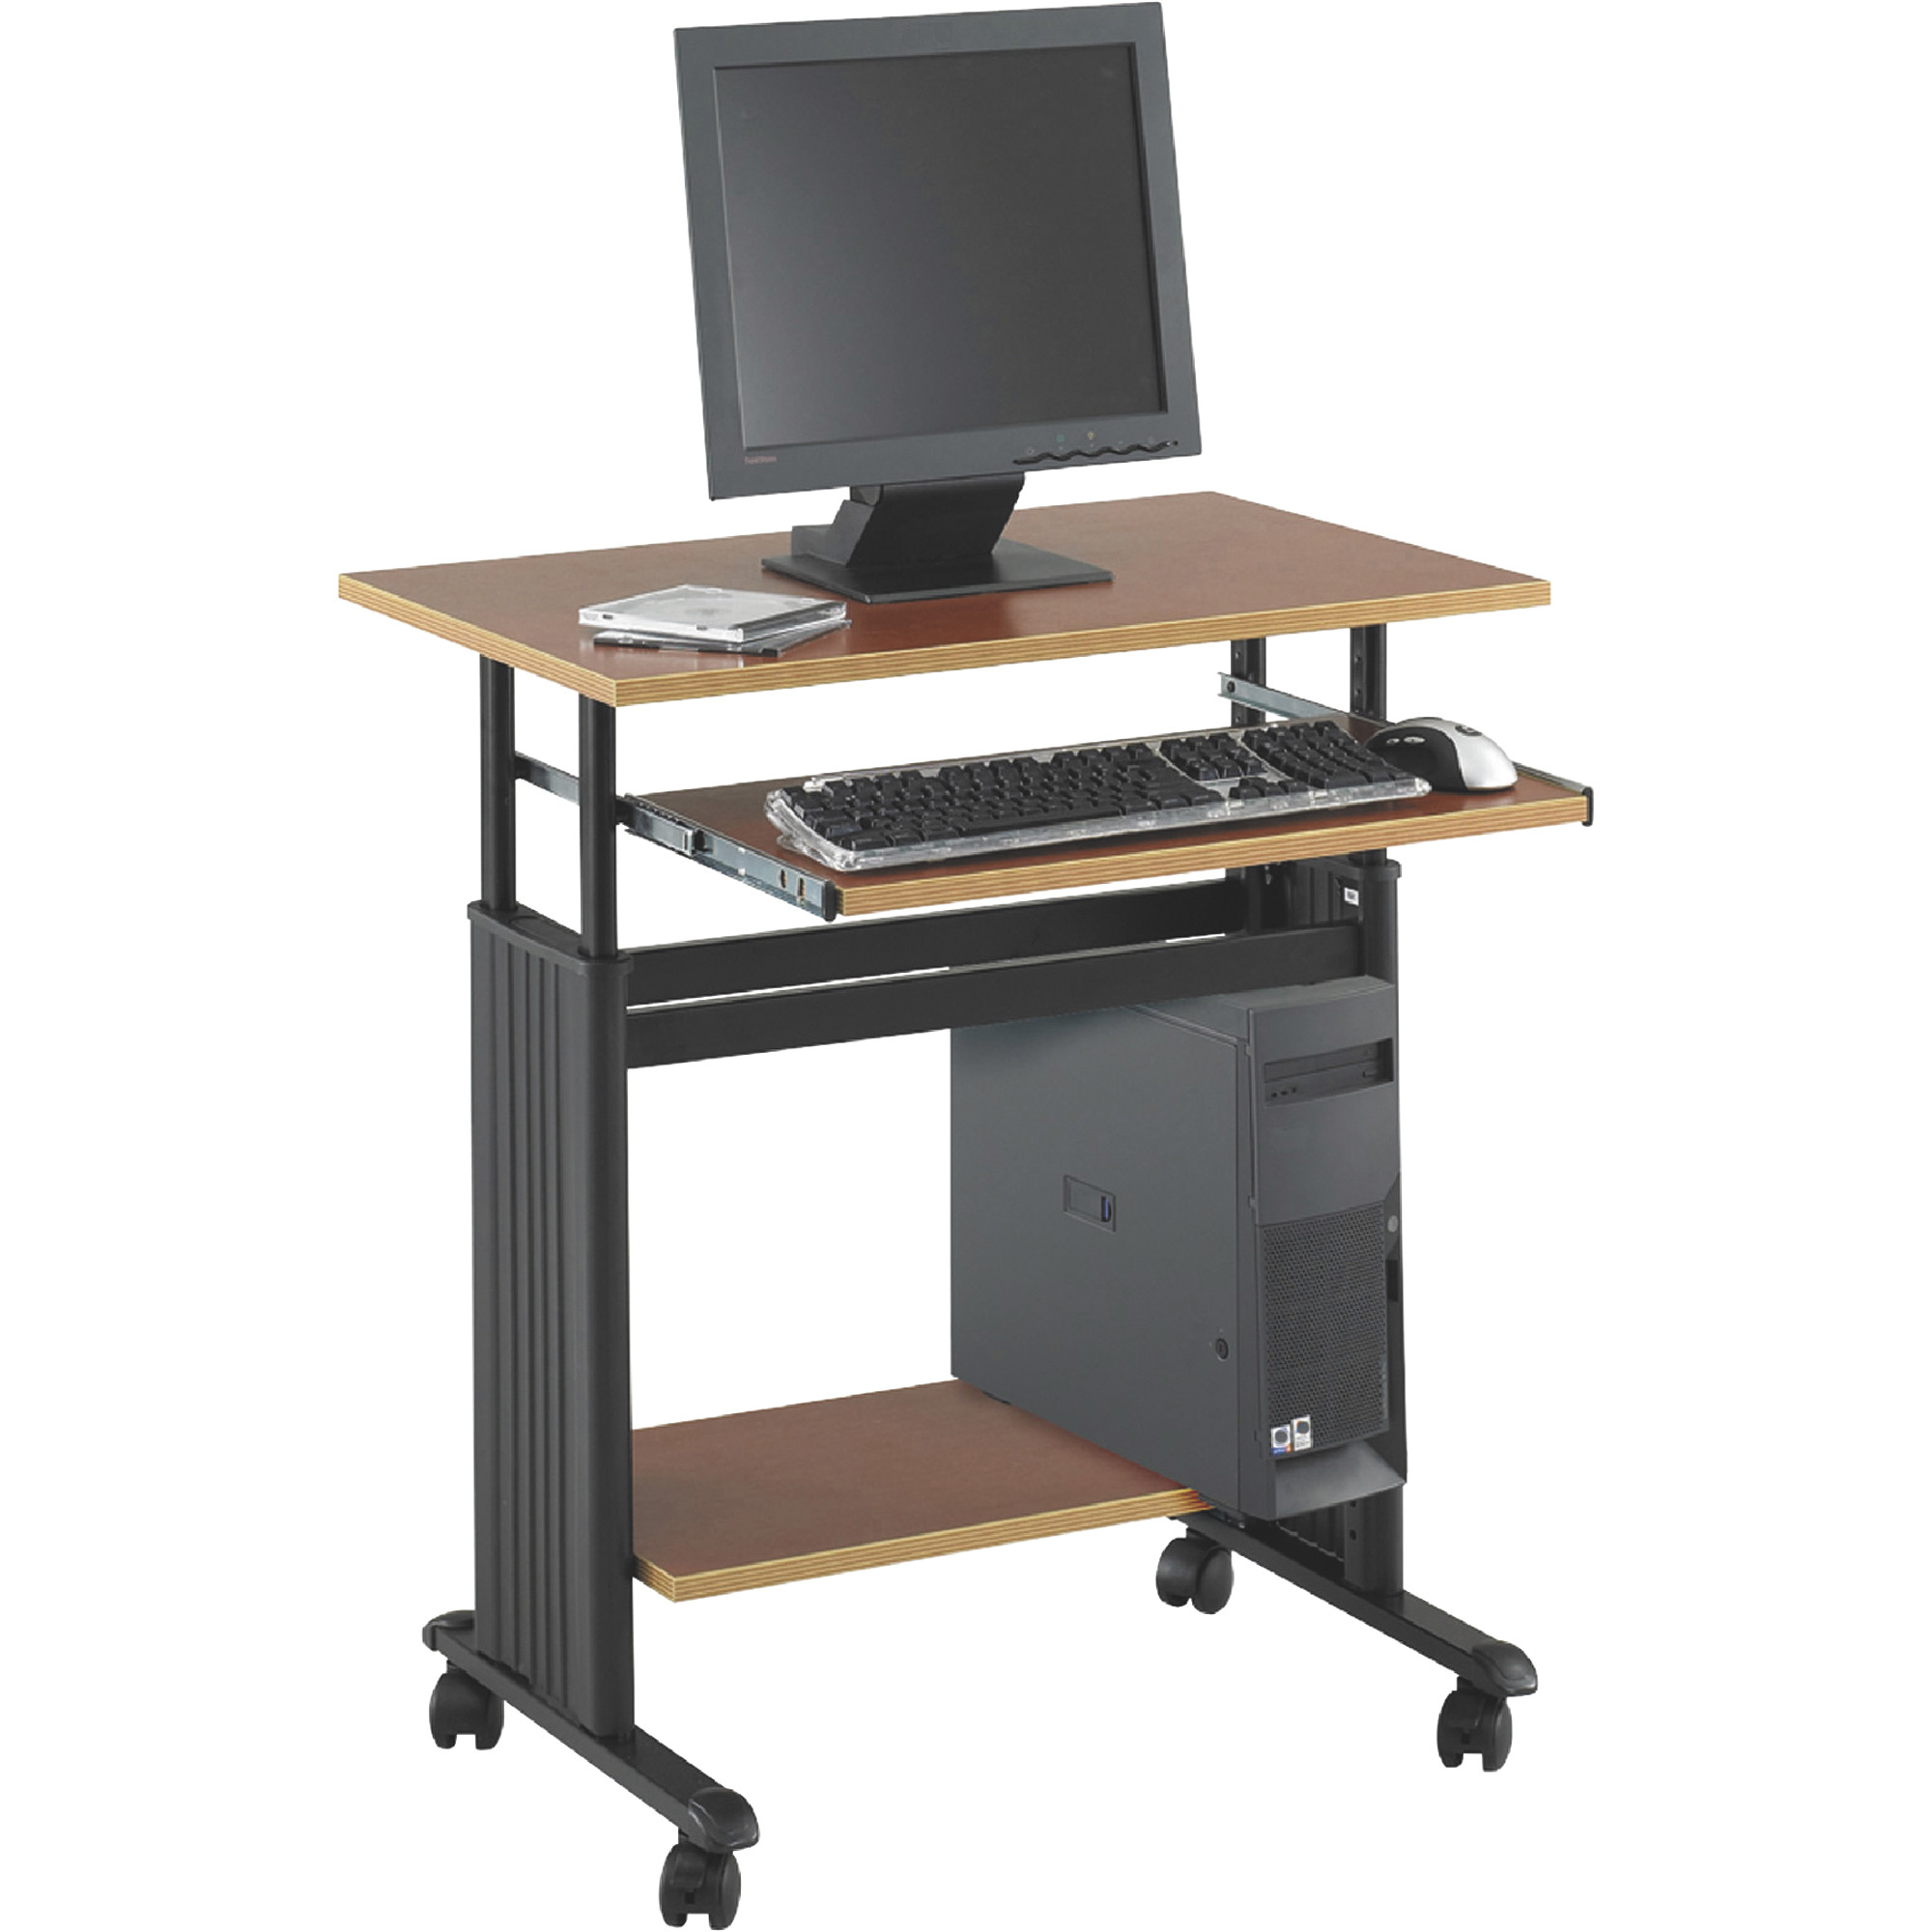 Safco Muv Adjustable-Height Mobile Computer Standing Desk — 28Inch W, Model 1925CY -  Mayline Safco